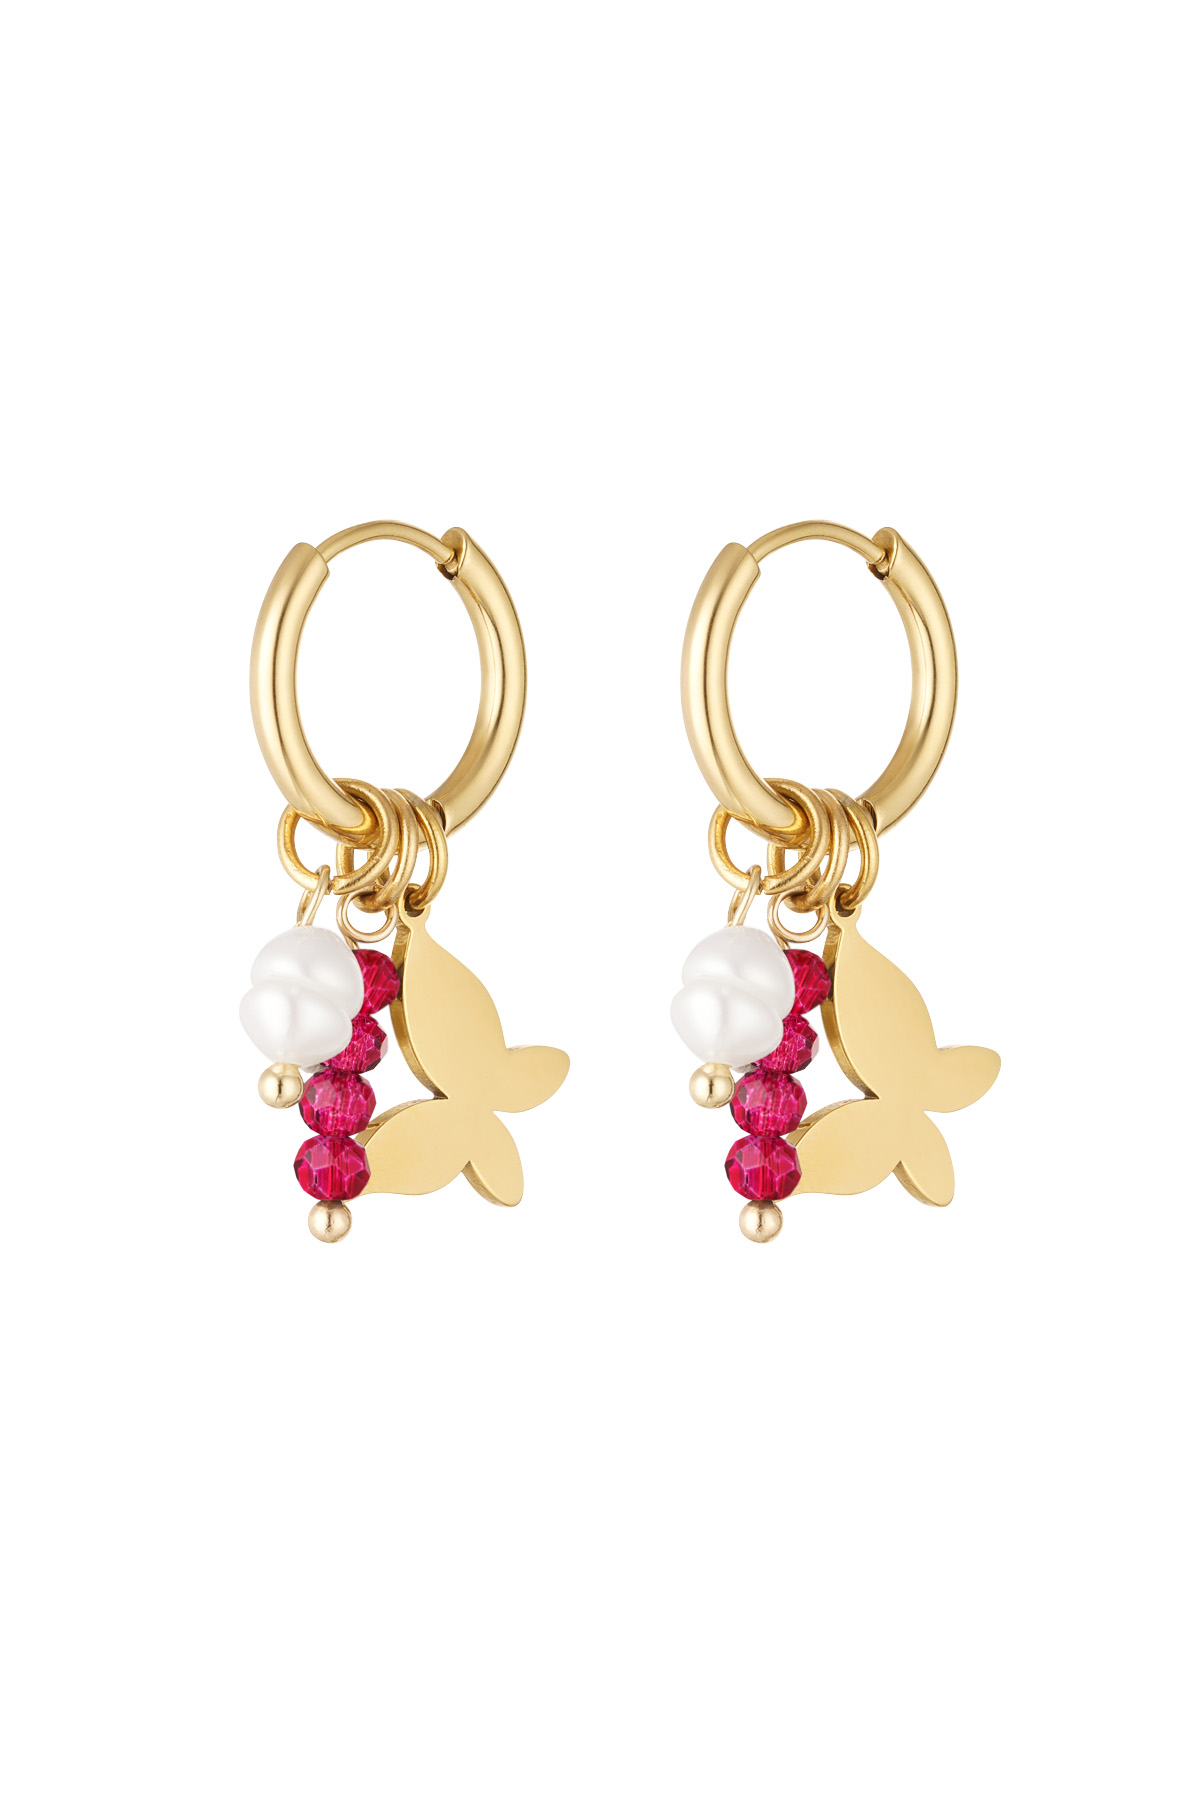 Butterfly earrings with beads - gold/pink